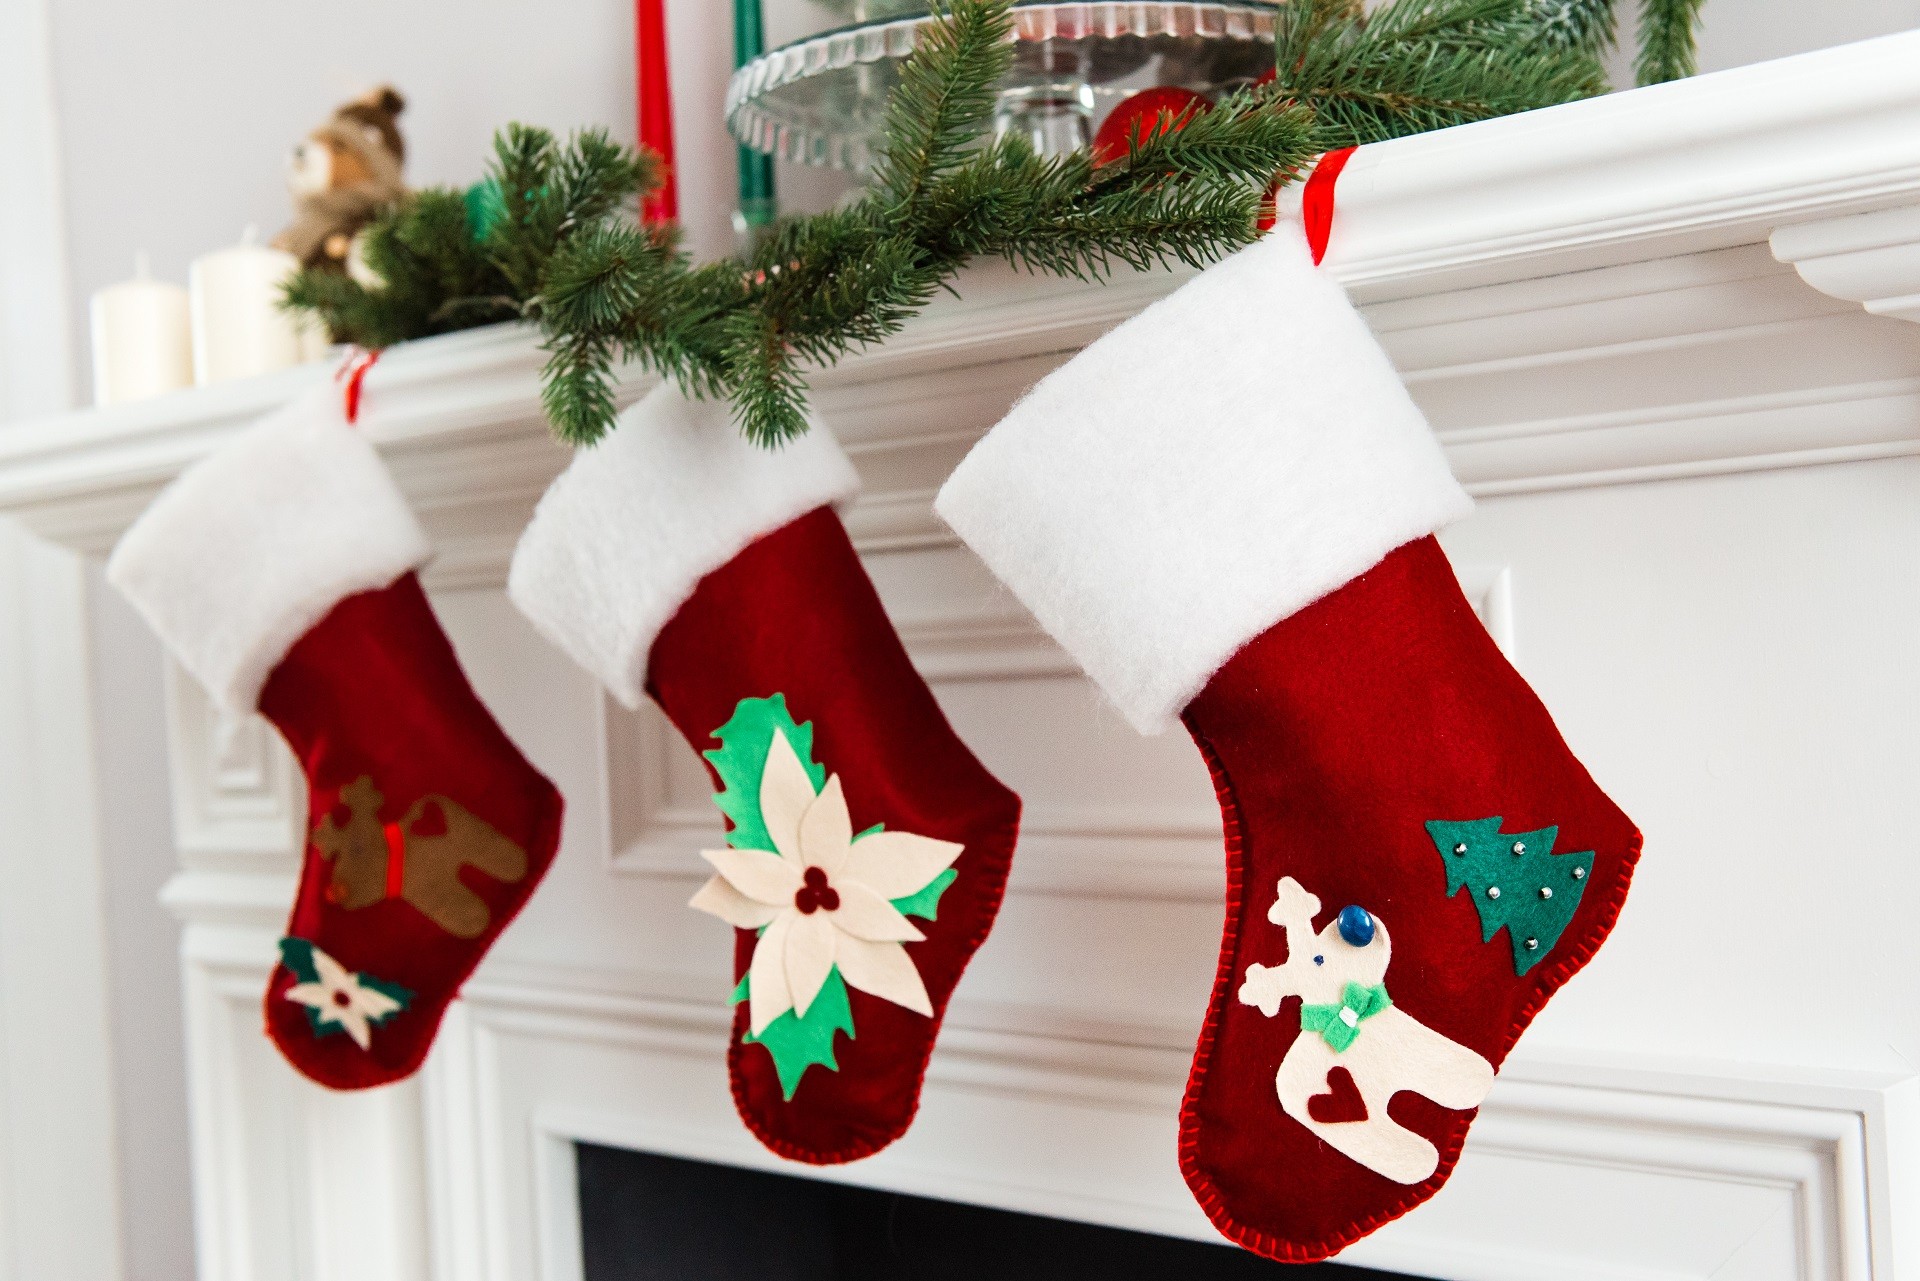 Decorated stockings